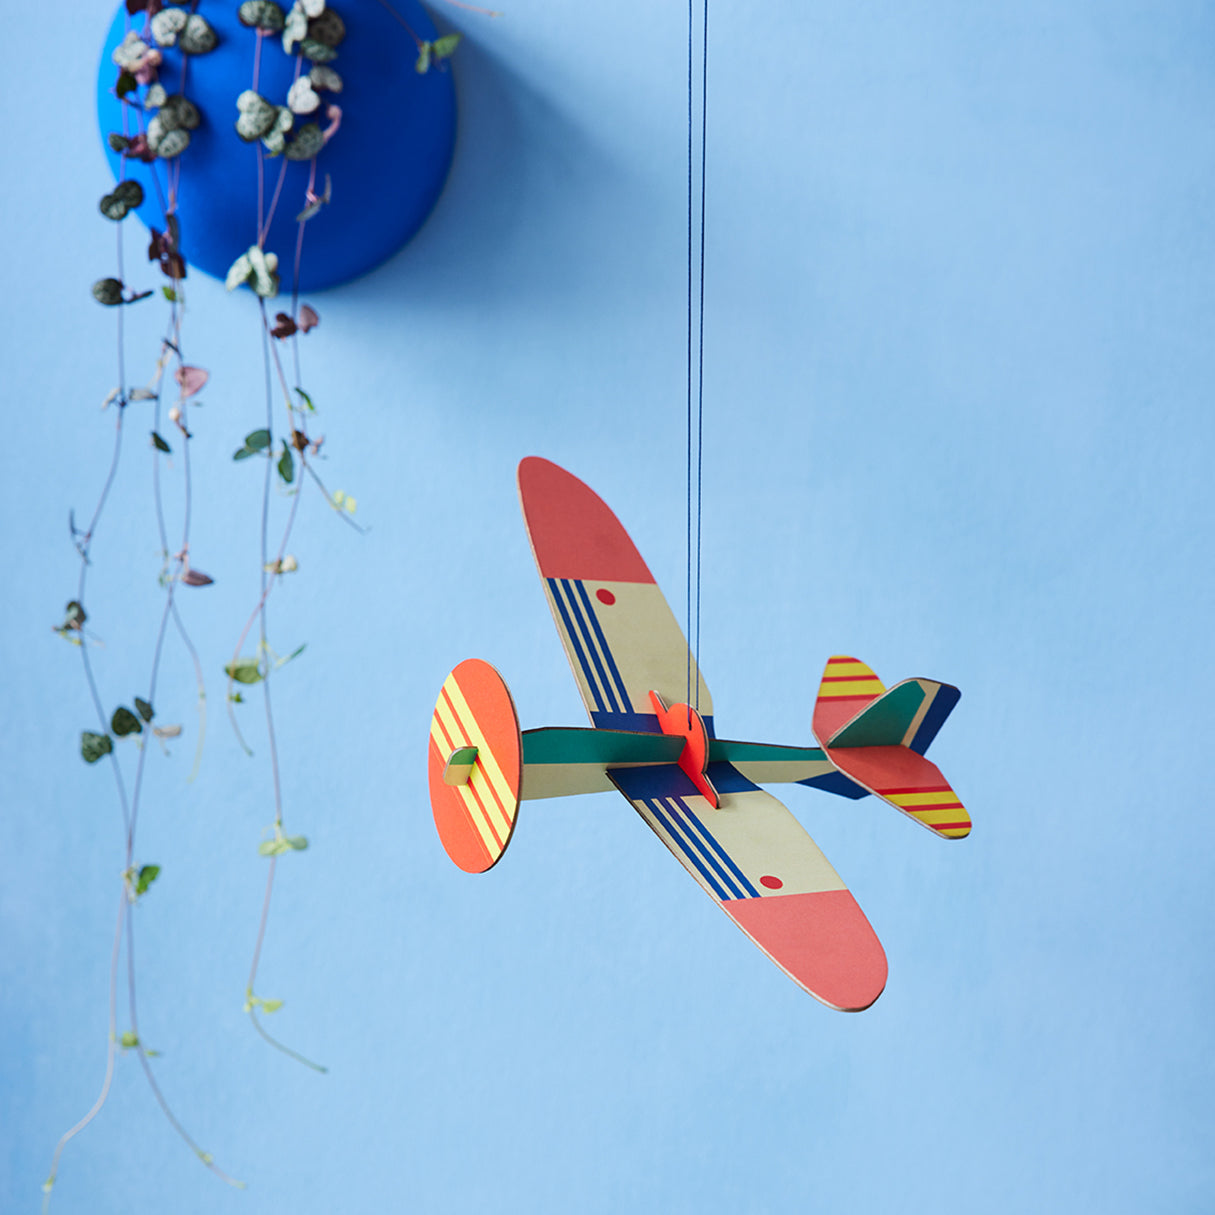 Photo of assembled Propeller Plane by Studio Roof, multicolored.